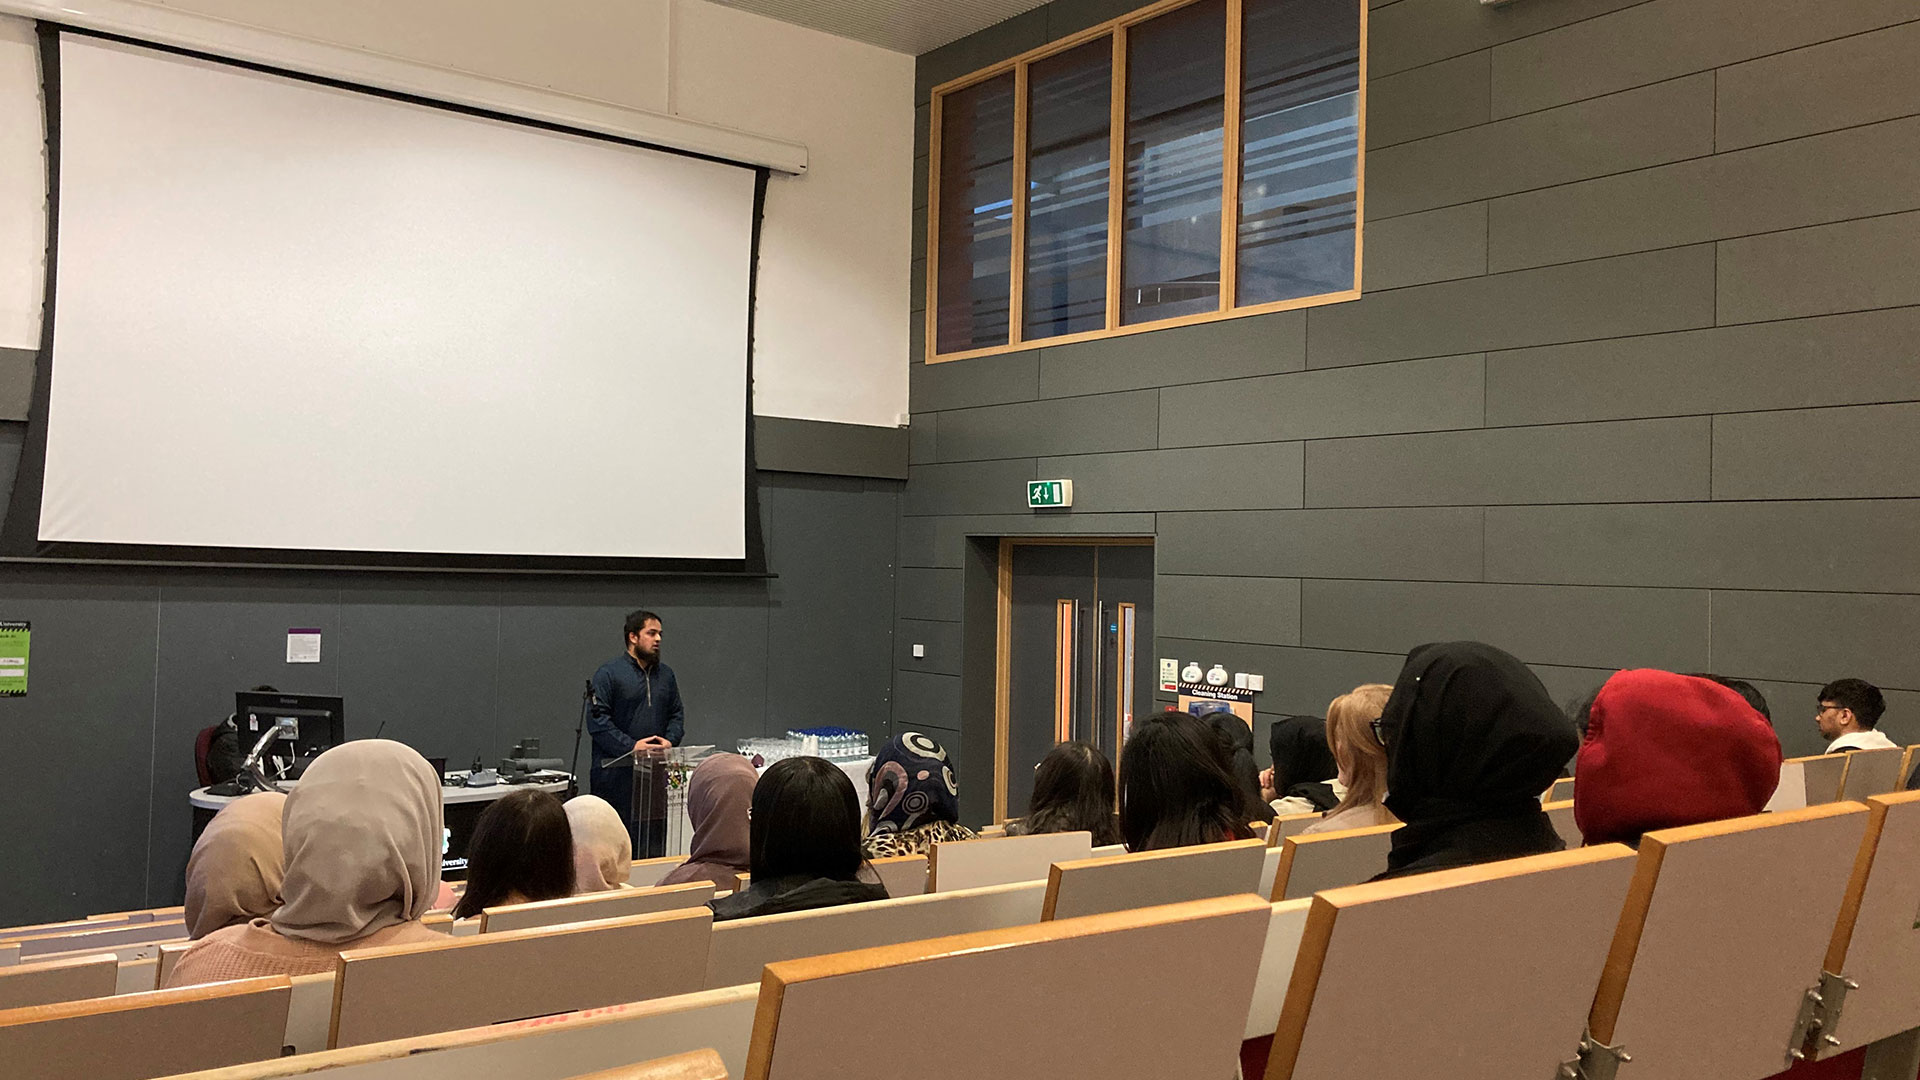 A group of Muslim students sit in a lecture theatre.